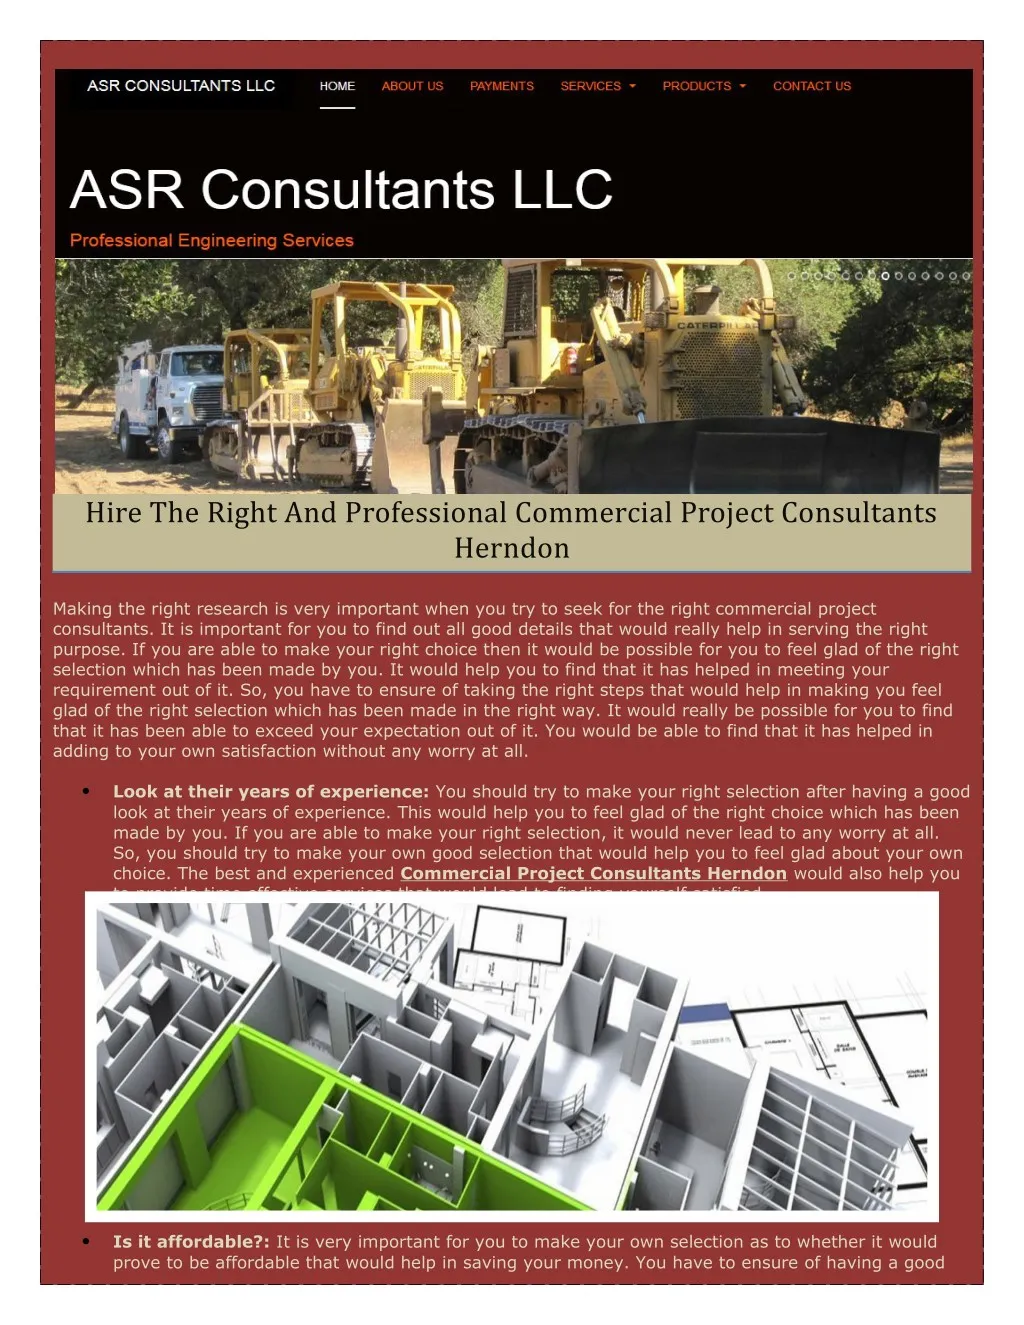 hire the right and professional commercial